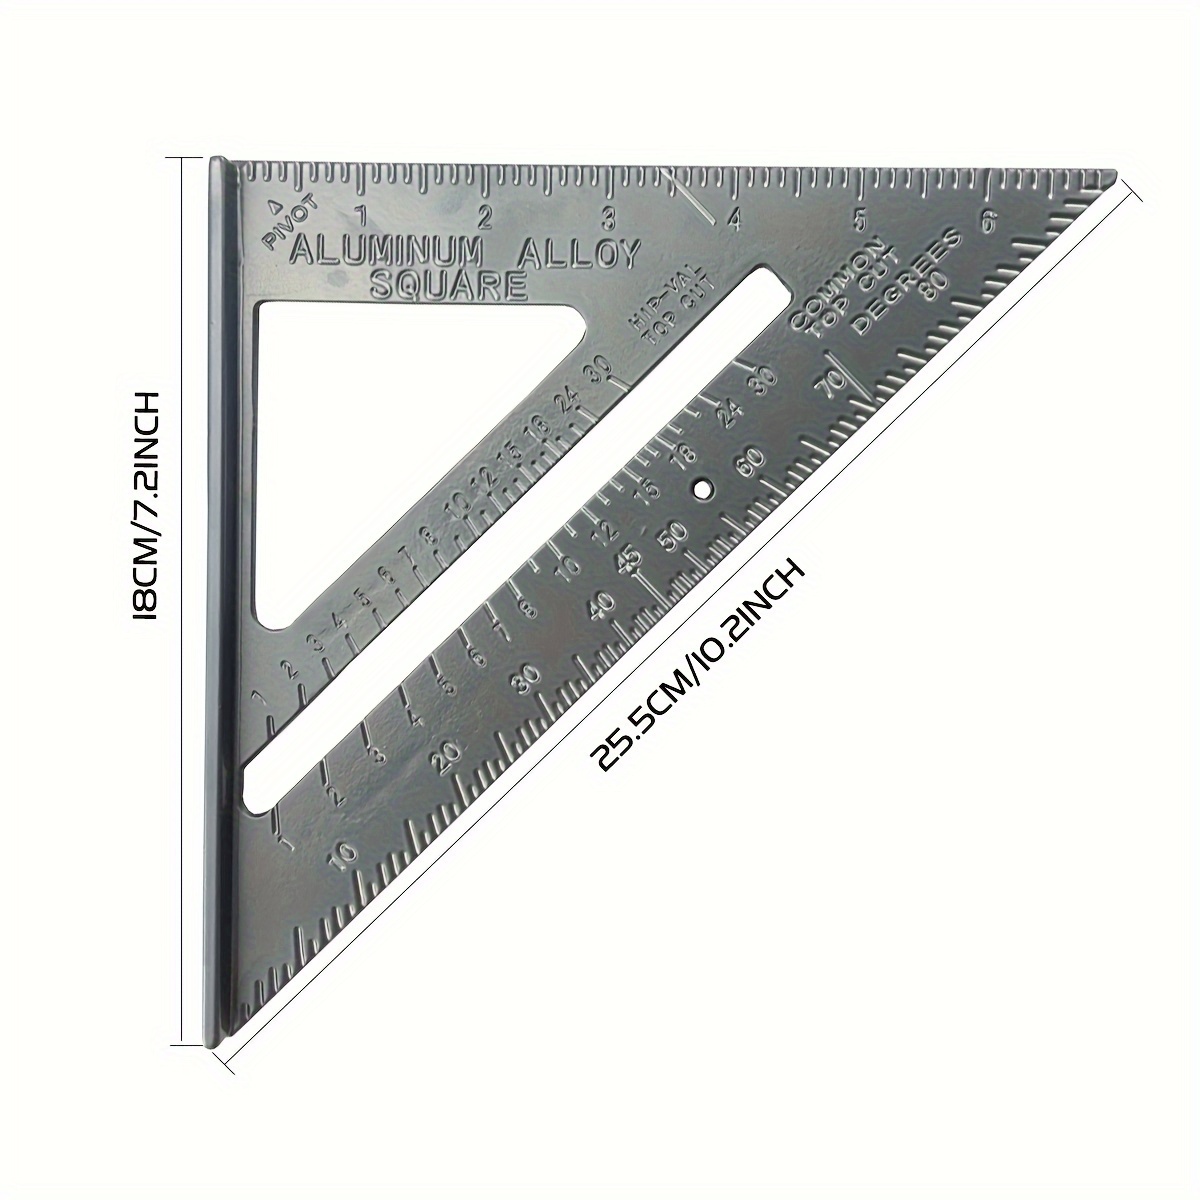 Right Angle Triangle Ruler 7 Inch Aluminium Alloy for Industrial